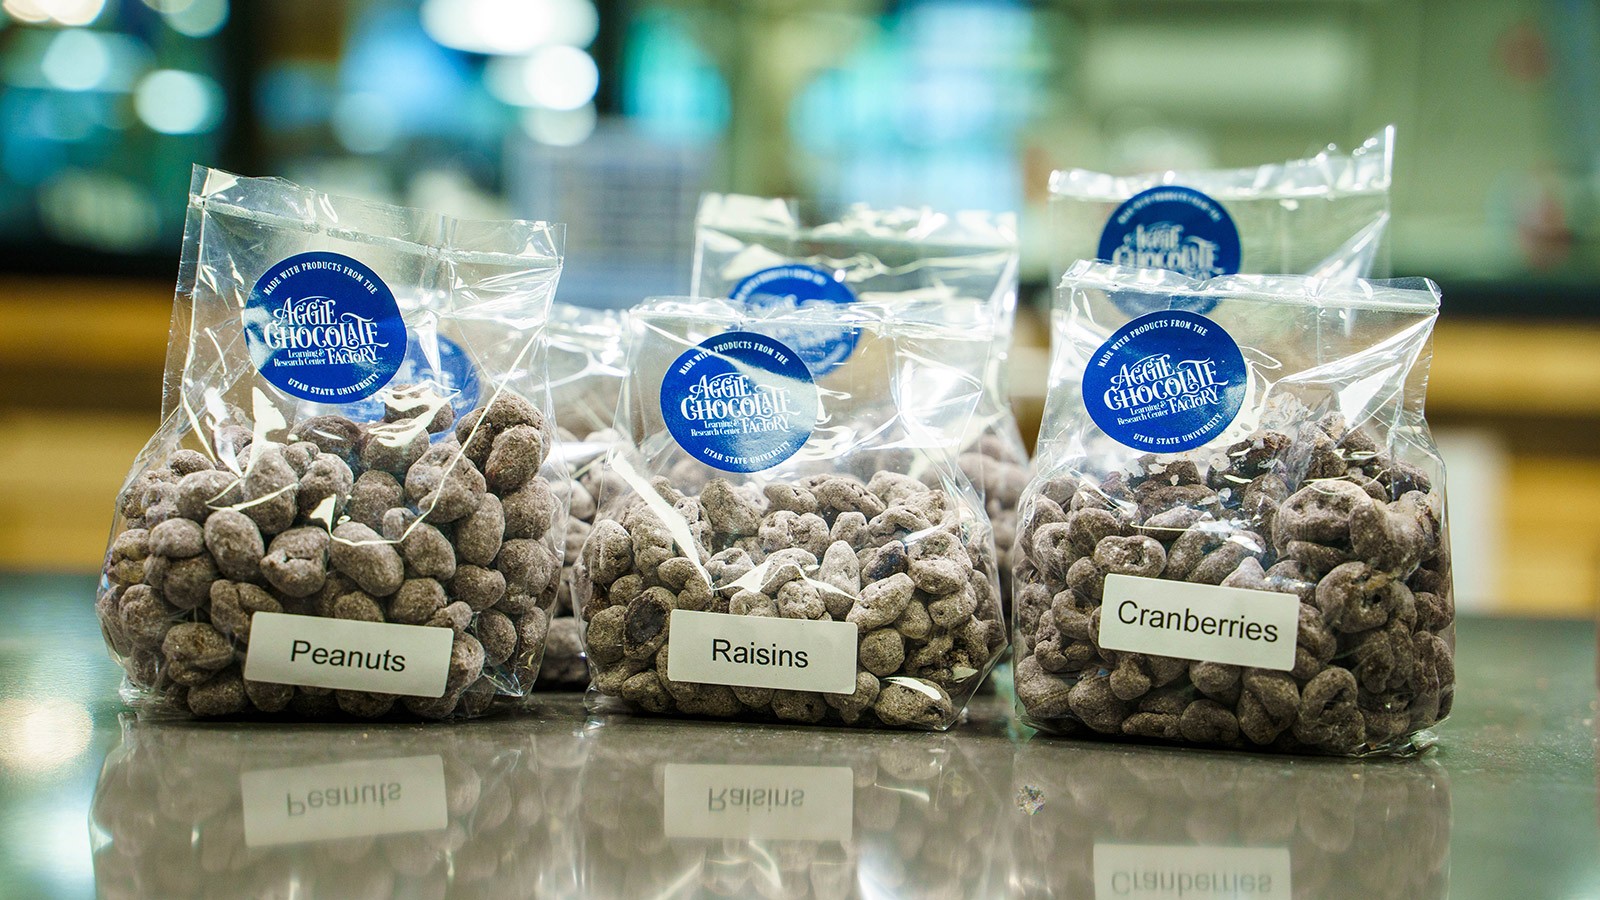 Chocolate covered peanuts, raisins and cranberries from the Aggie Chocolate Factory.